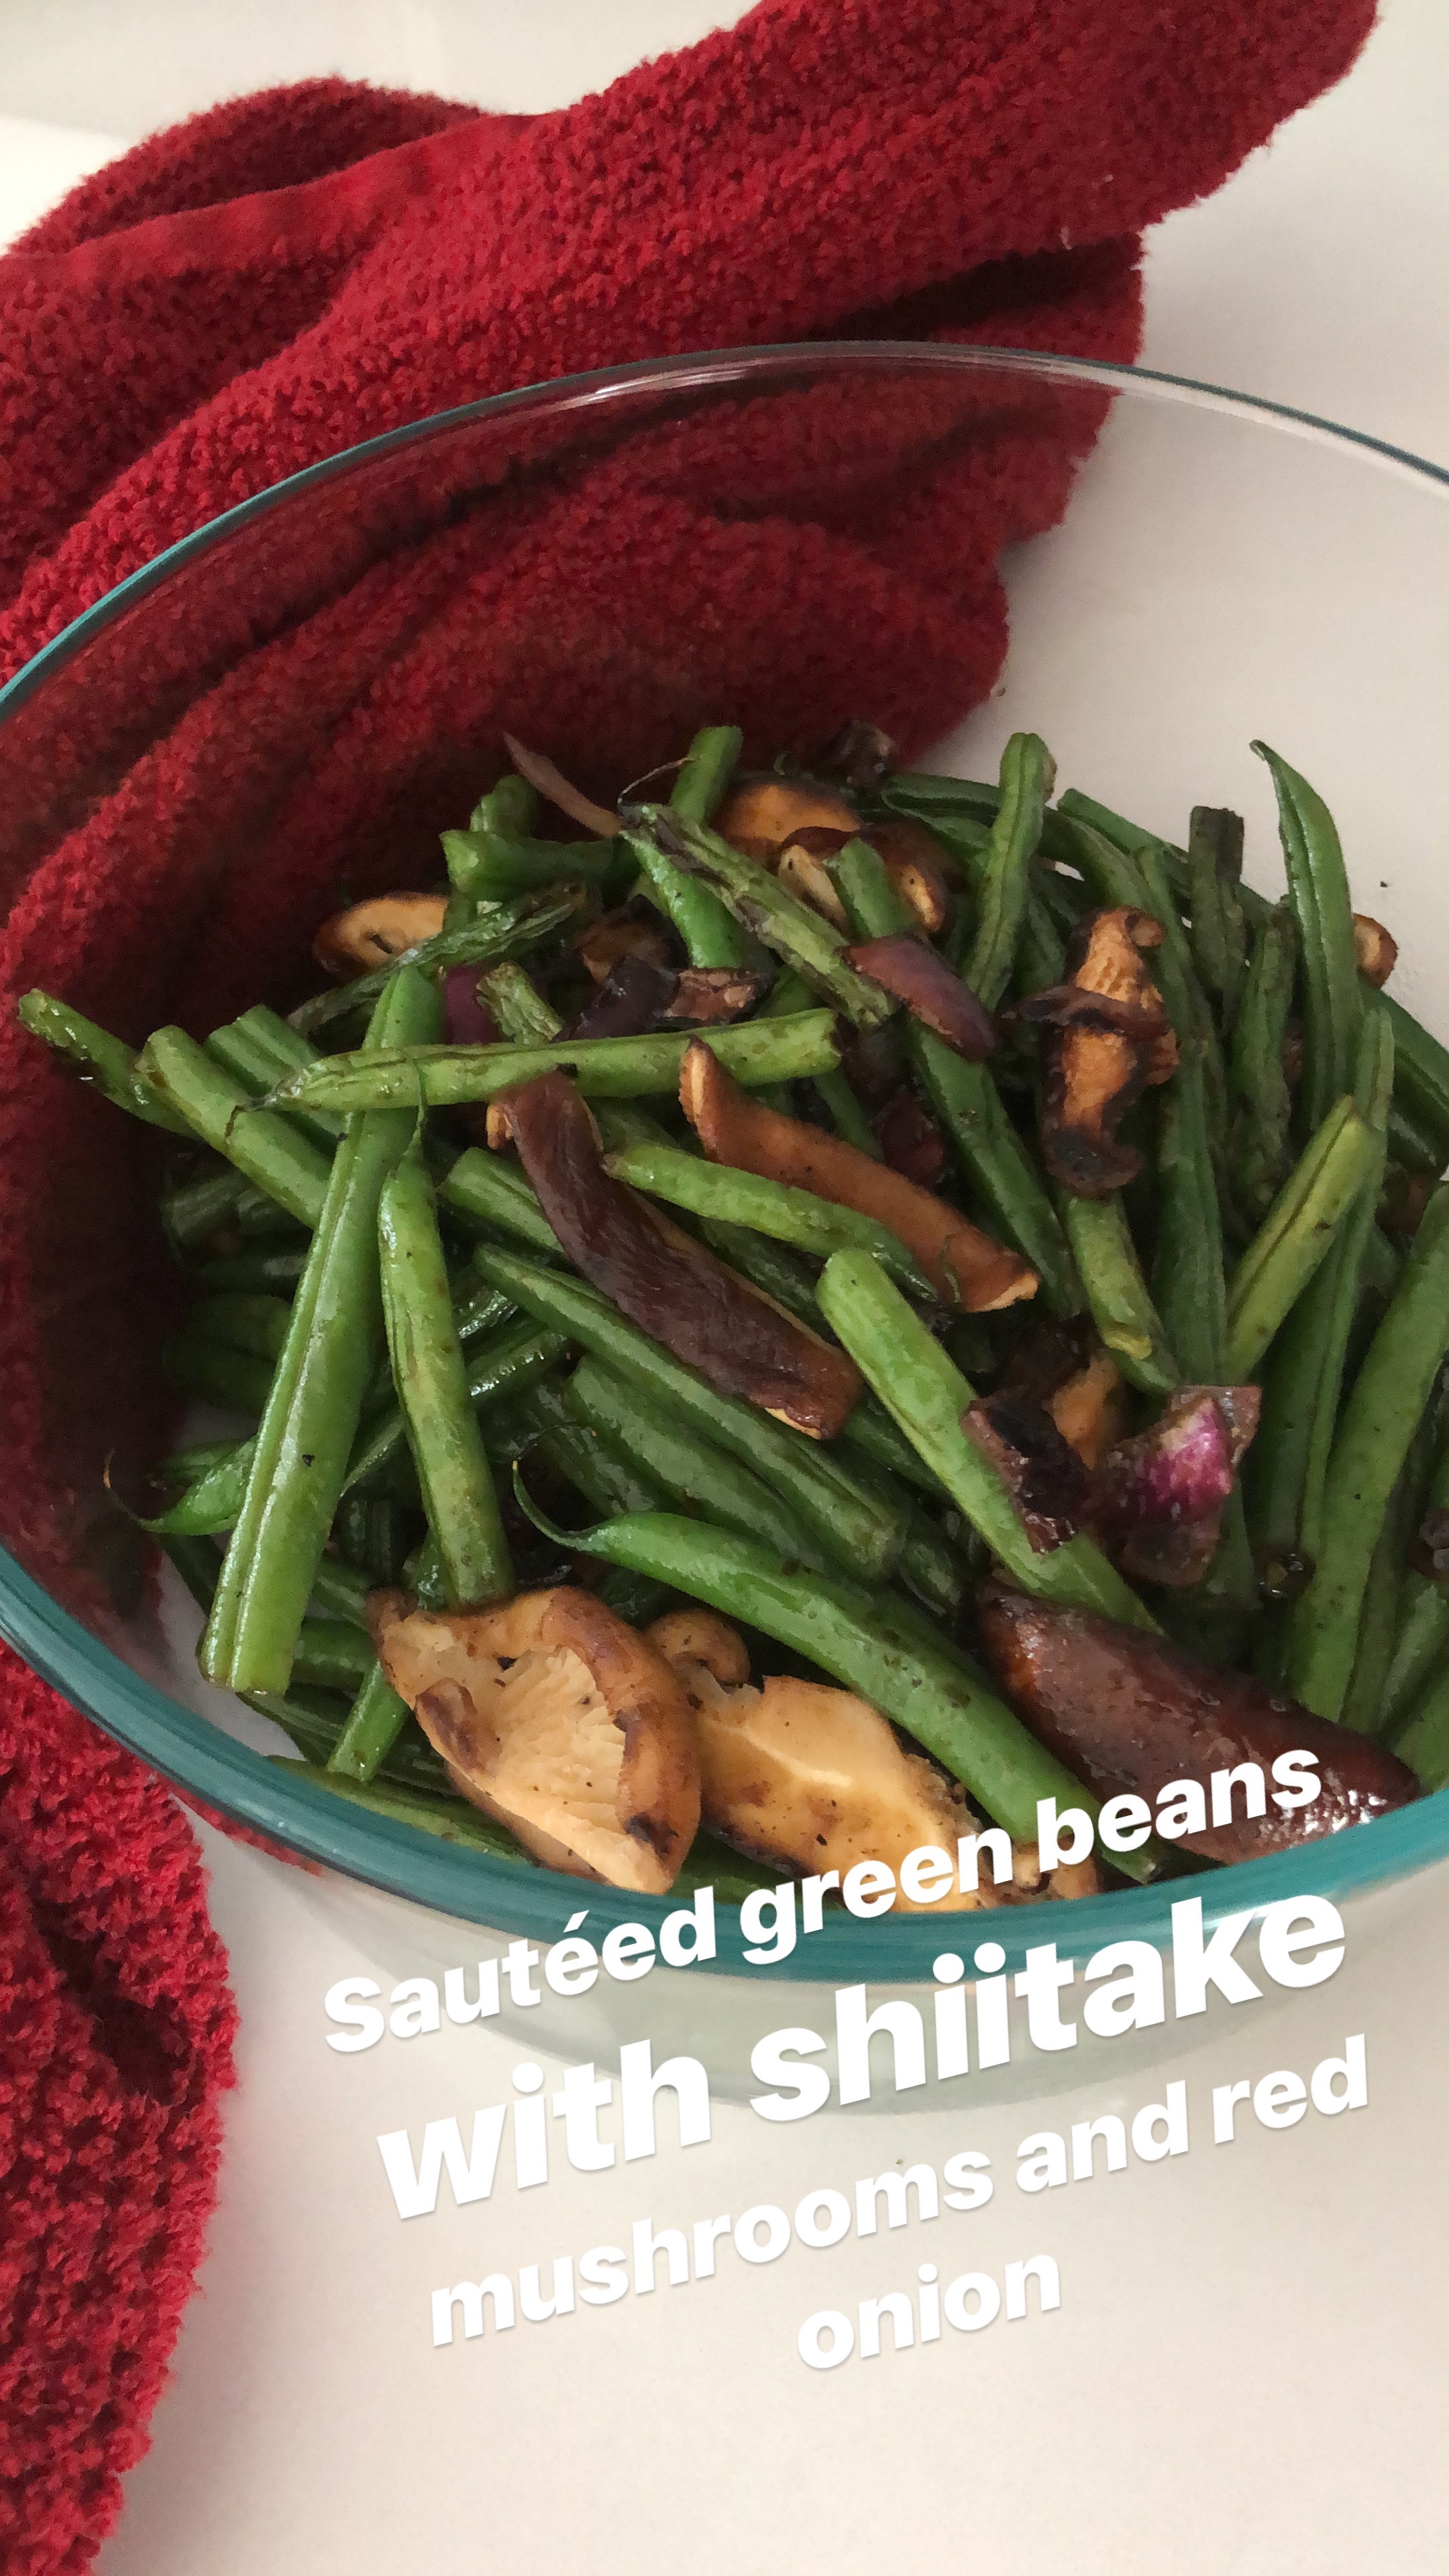 This healthy and easy green bean recipe comes takes less than 15 minutes. Al dente green beans (Haricot Verts) get an umami pop from the sauteed mushrooms. | www.grownupdish.com